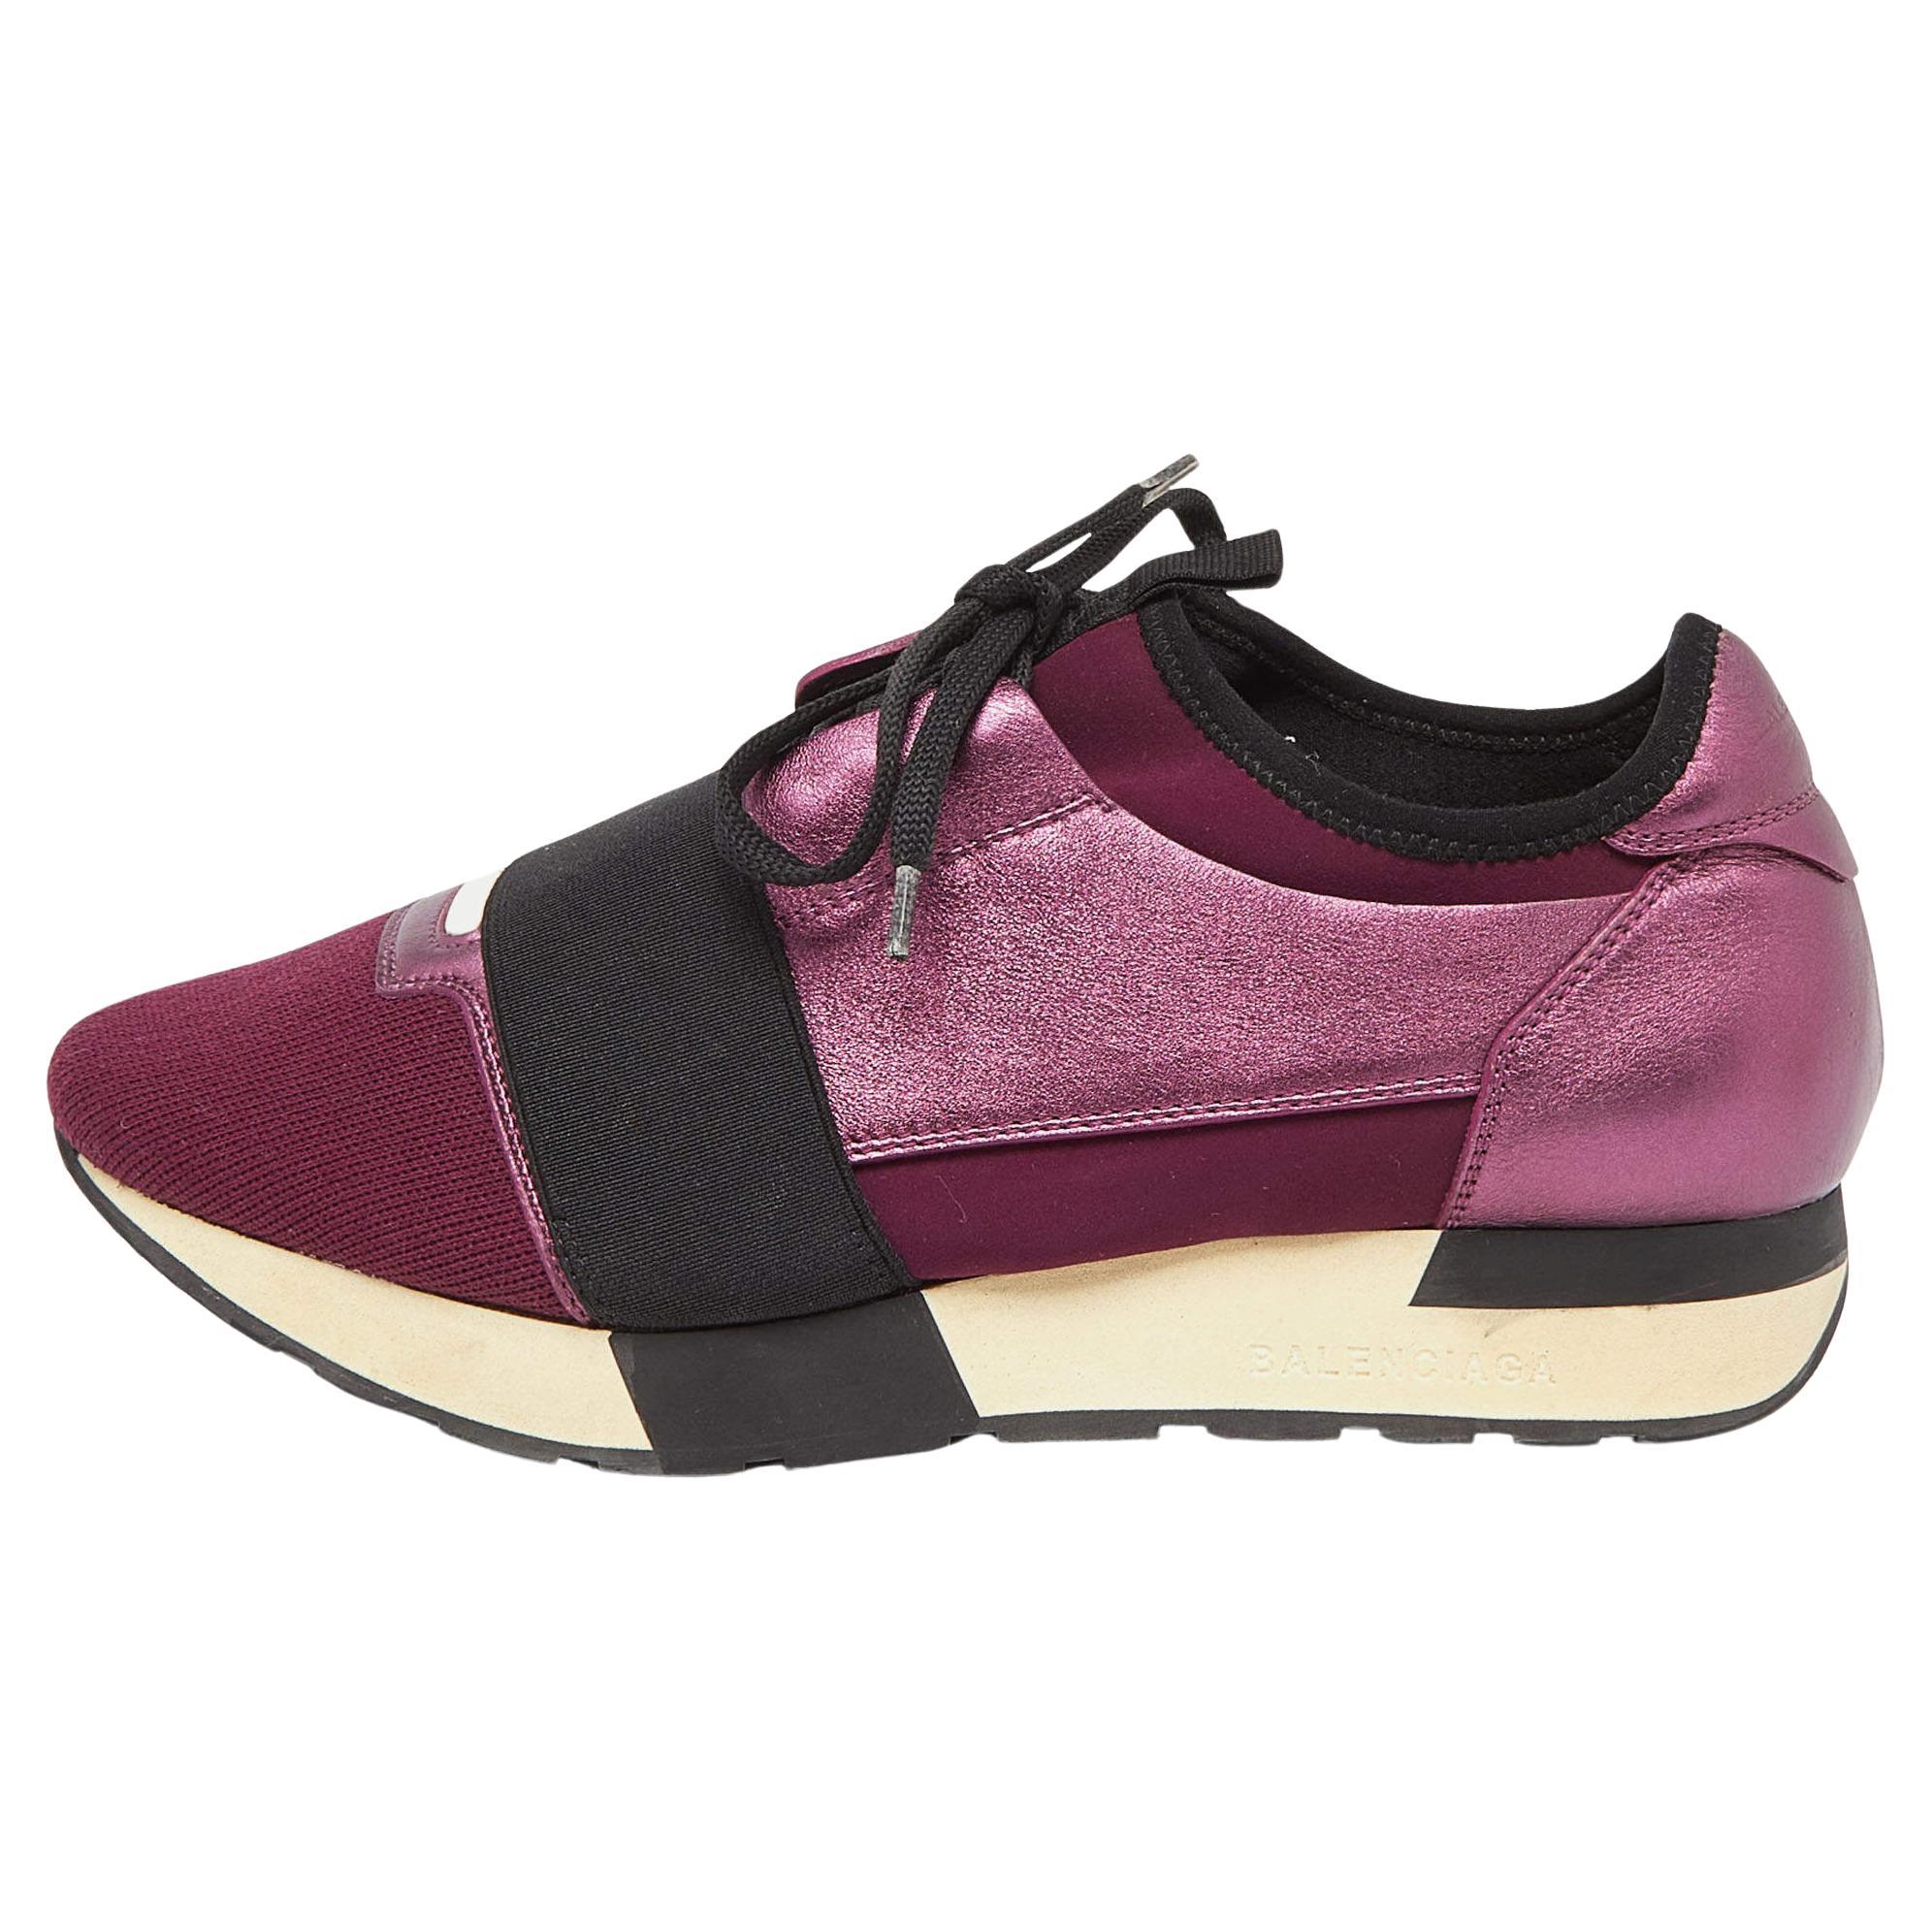 Balenciaga Purple Leather and Neoprene Race Runner Sneakers Size 38 For Sale